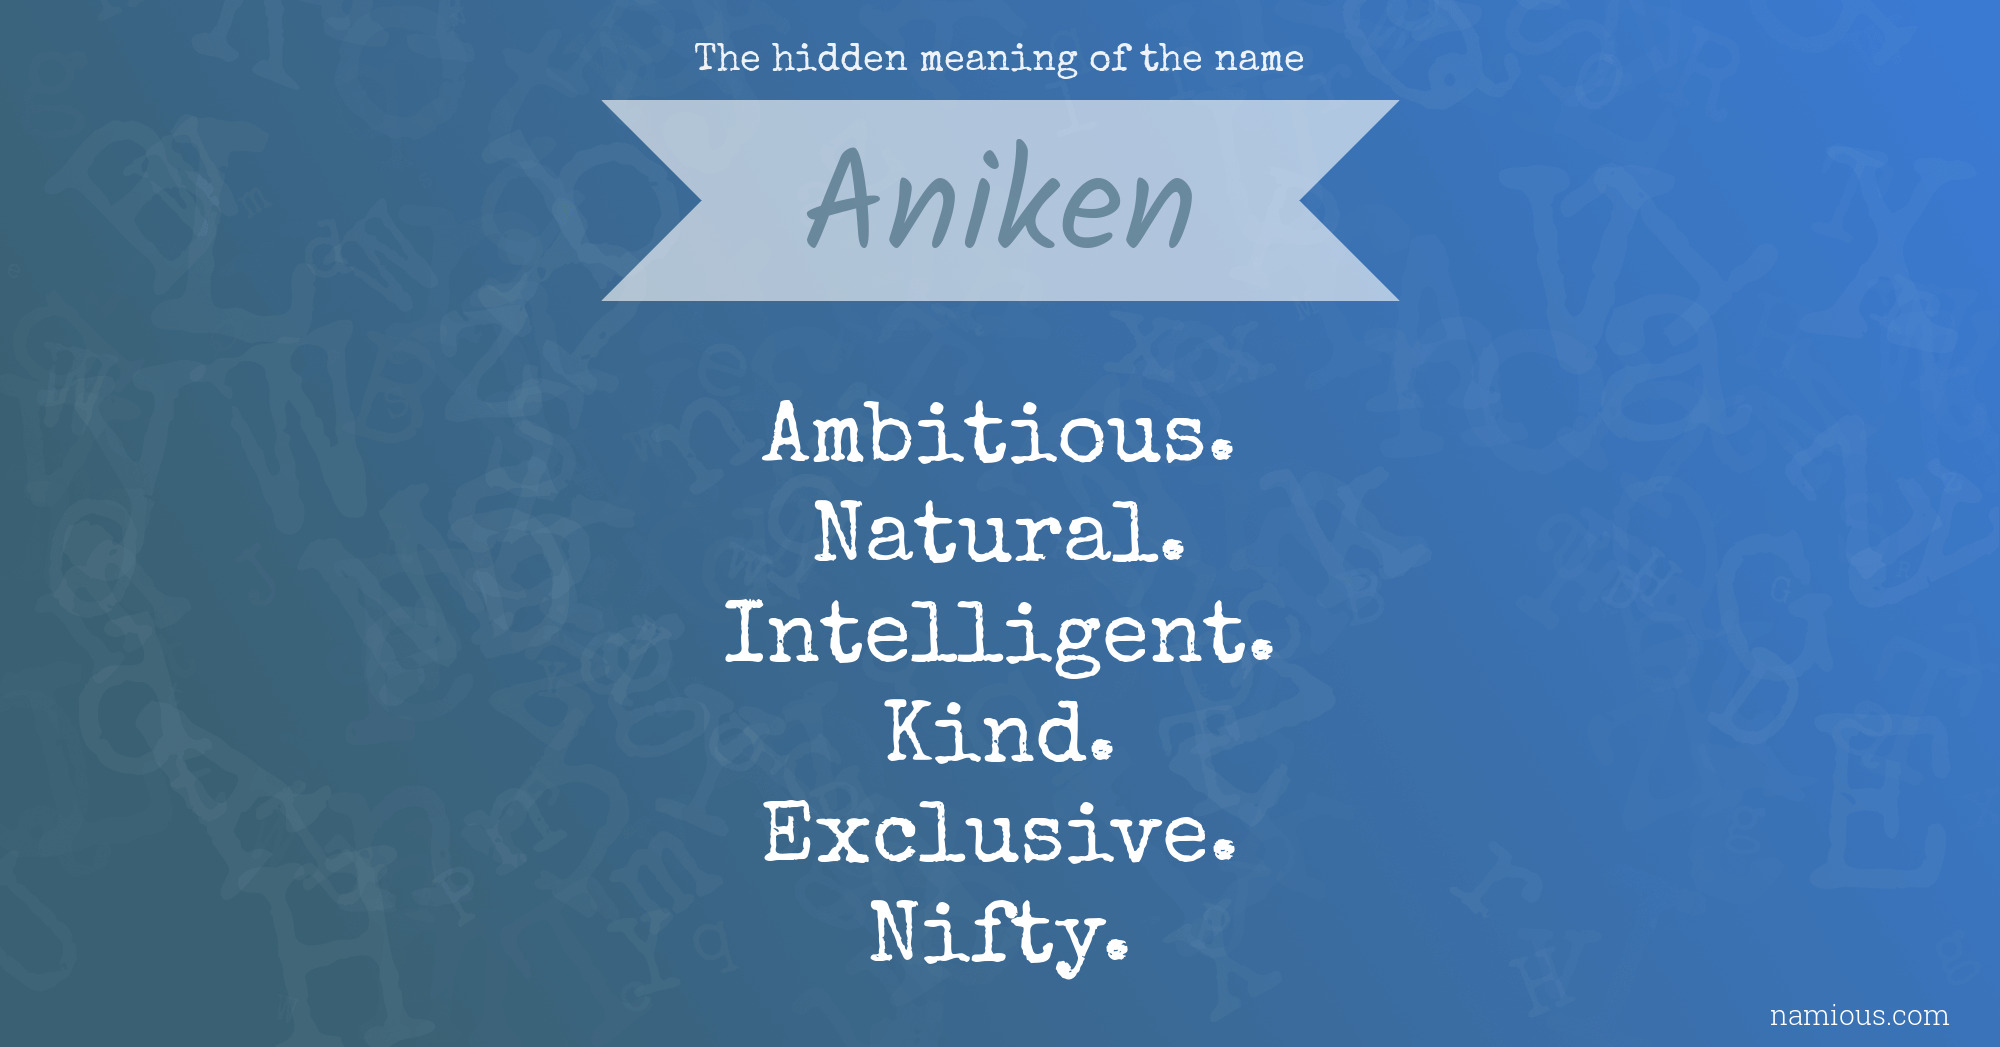 The hidden meaning of the name Aniken